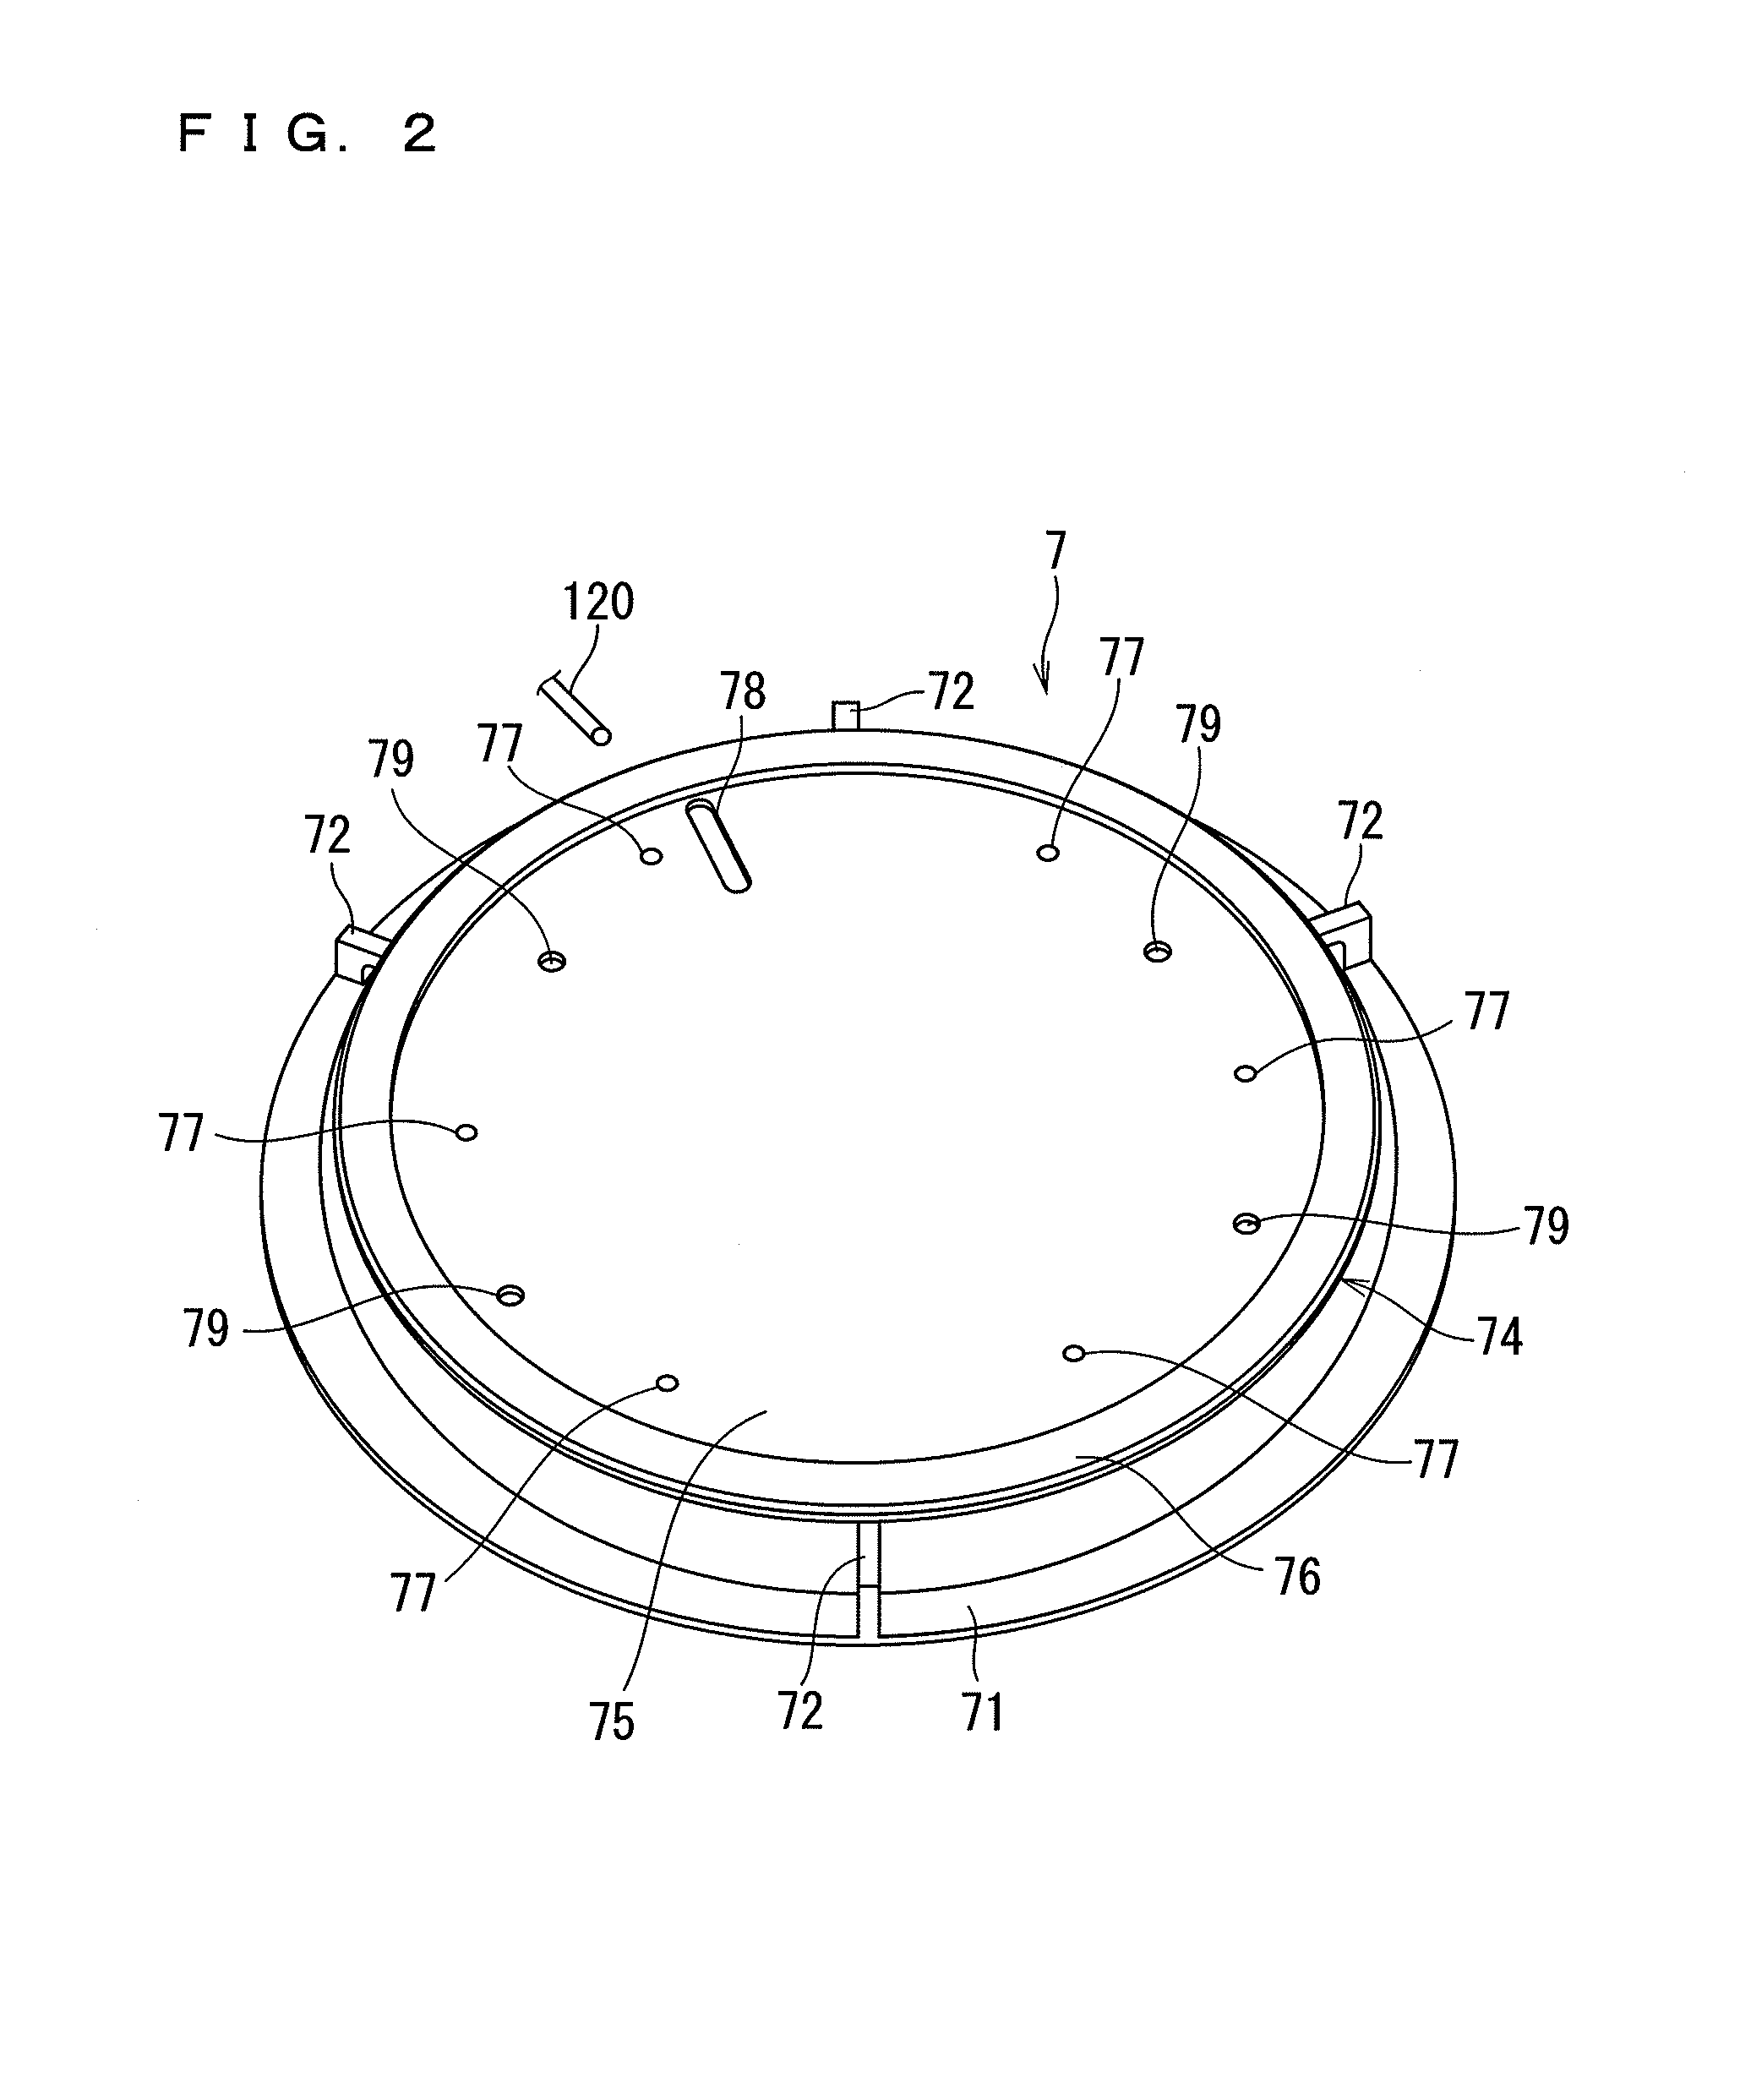 Heat treatment apparatus for heating substrate by irradiation with flash light